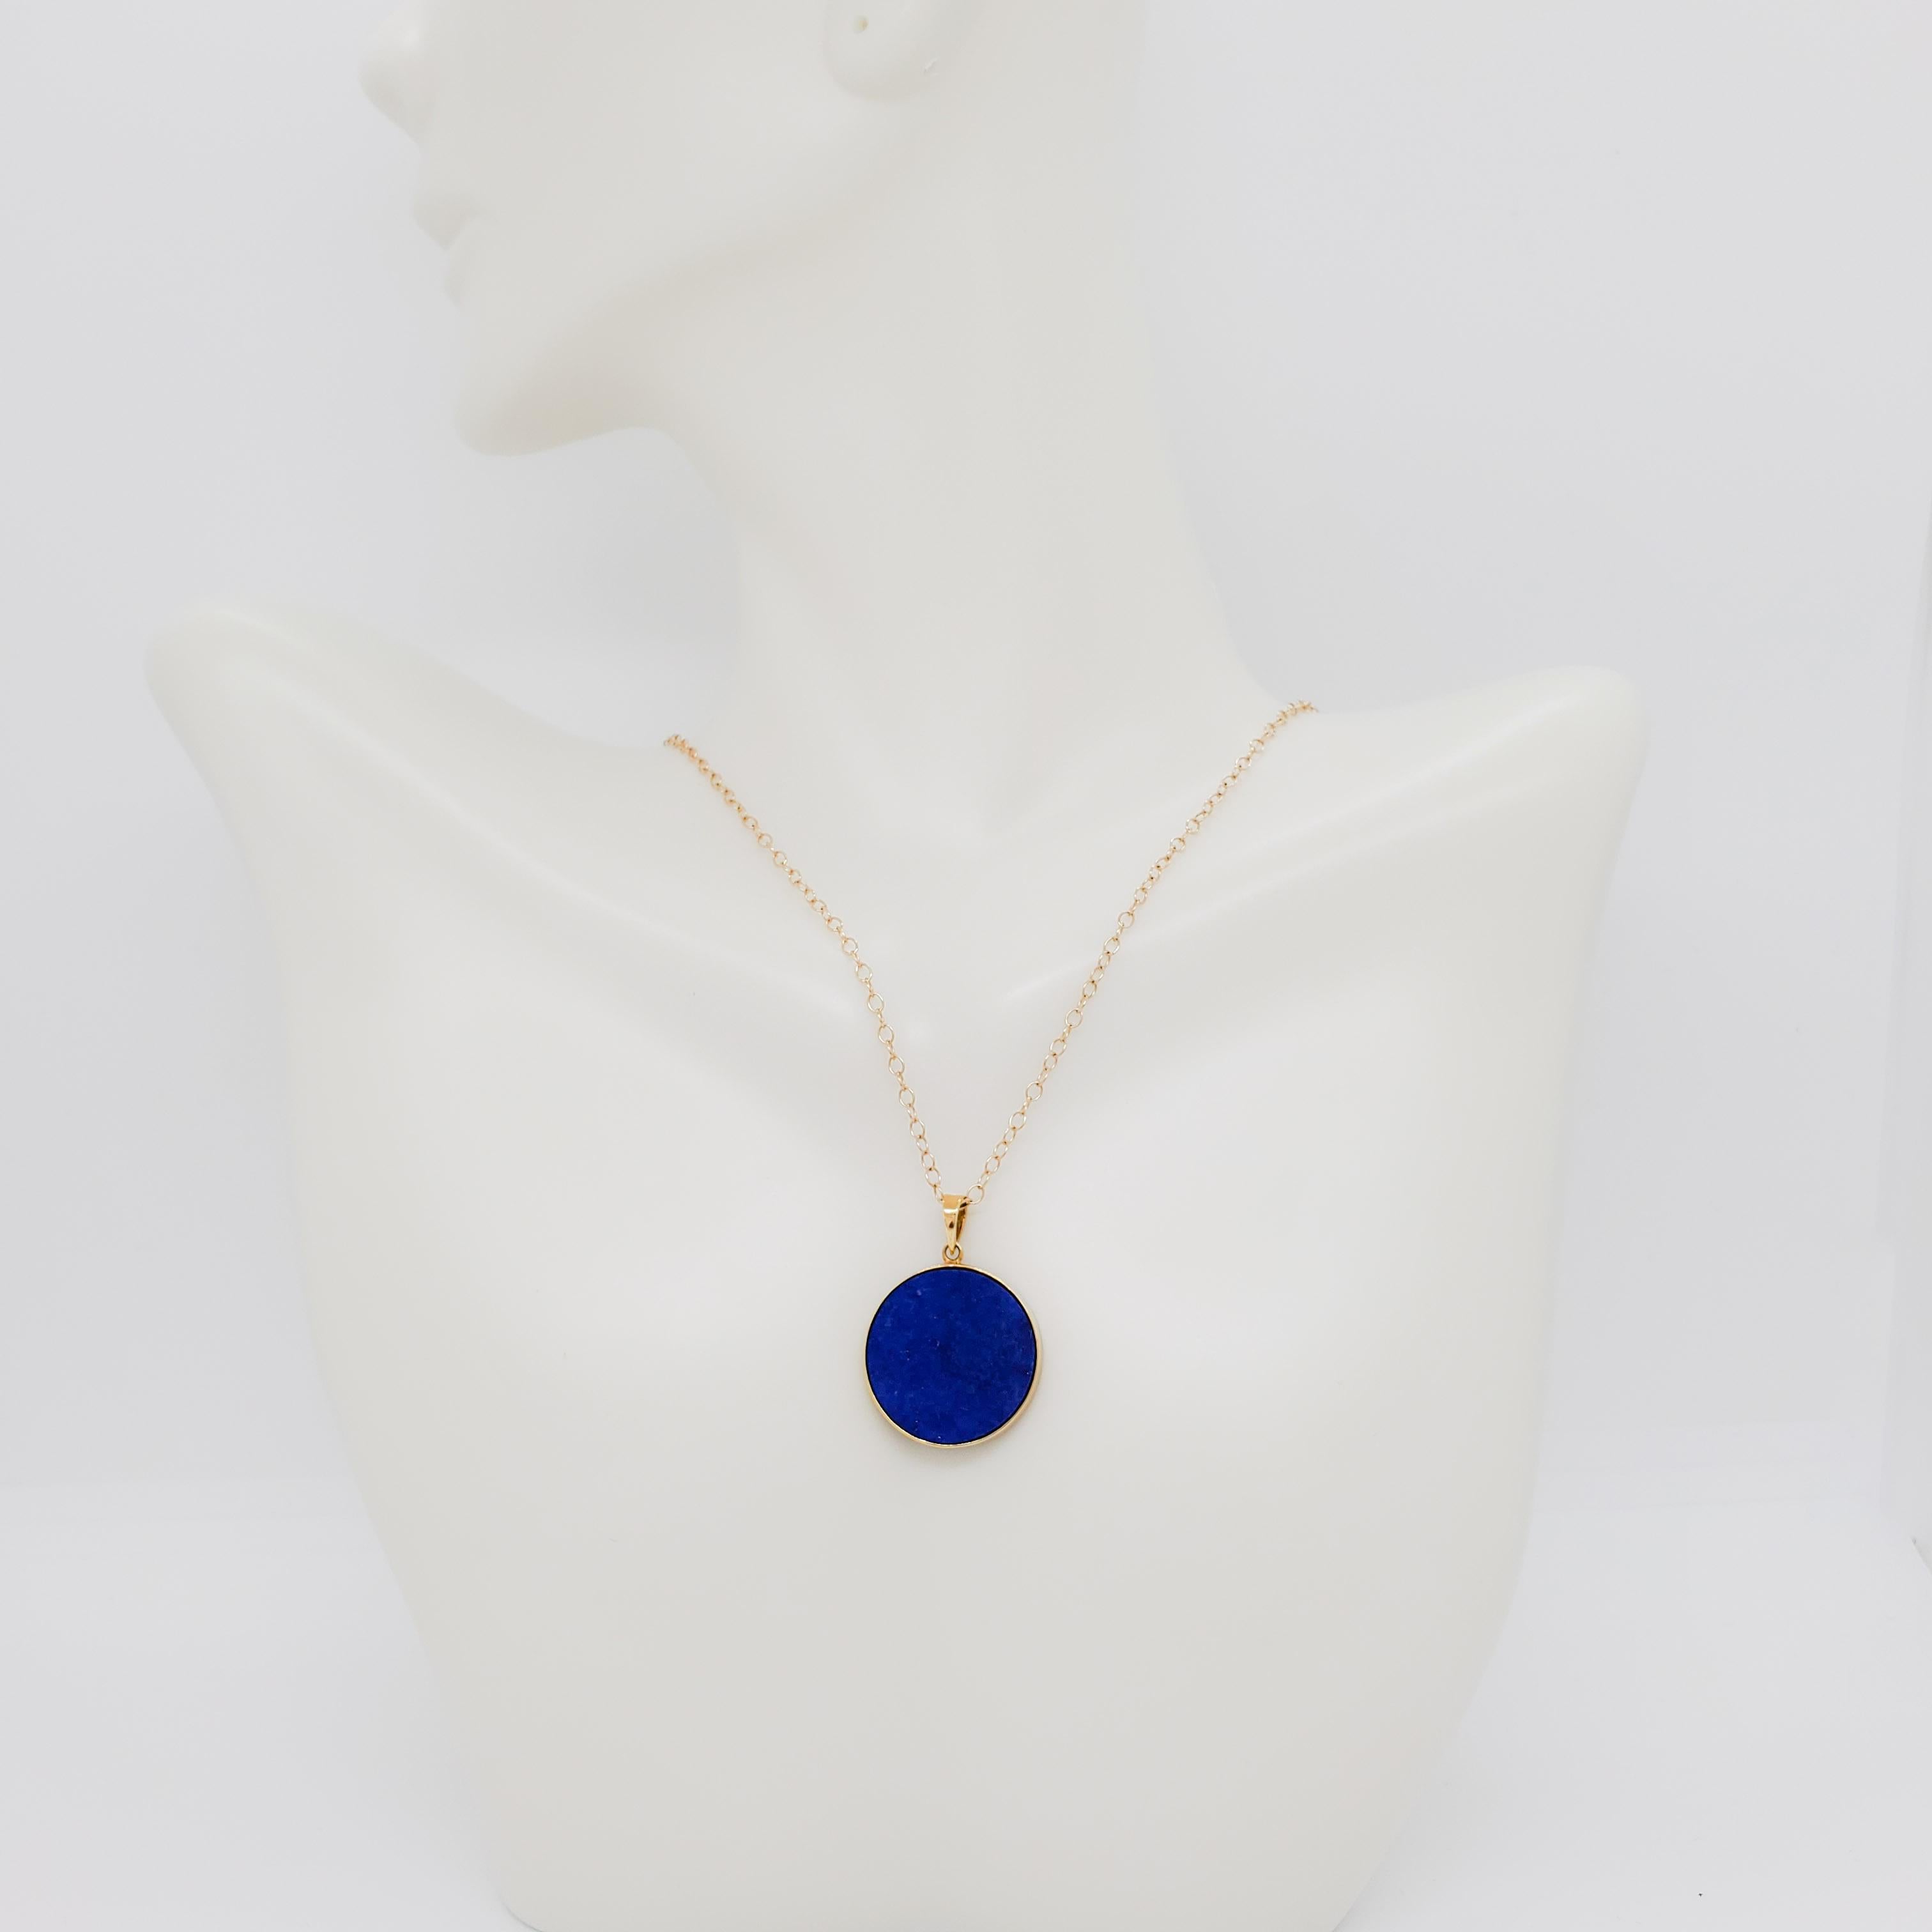 Beautiful lapis lazuli necklace handmade in 14k yellow gold. Length of chain is 16